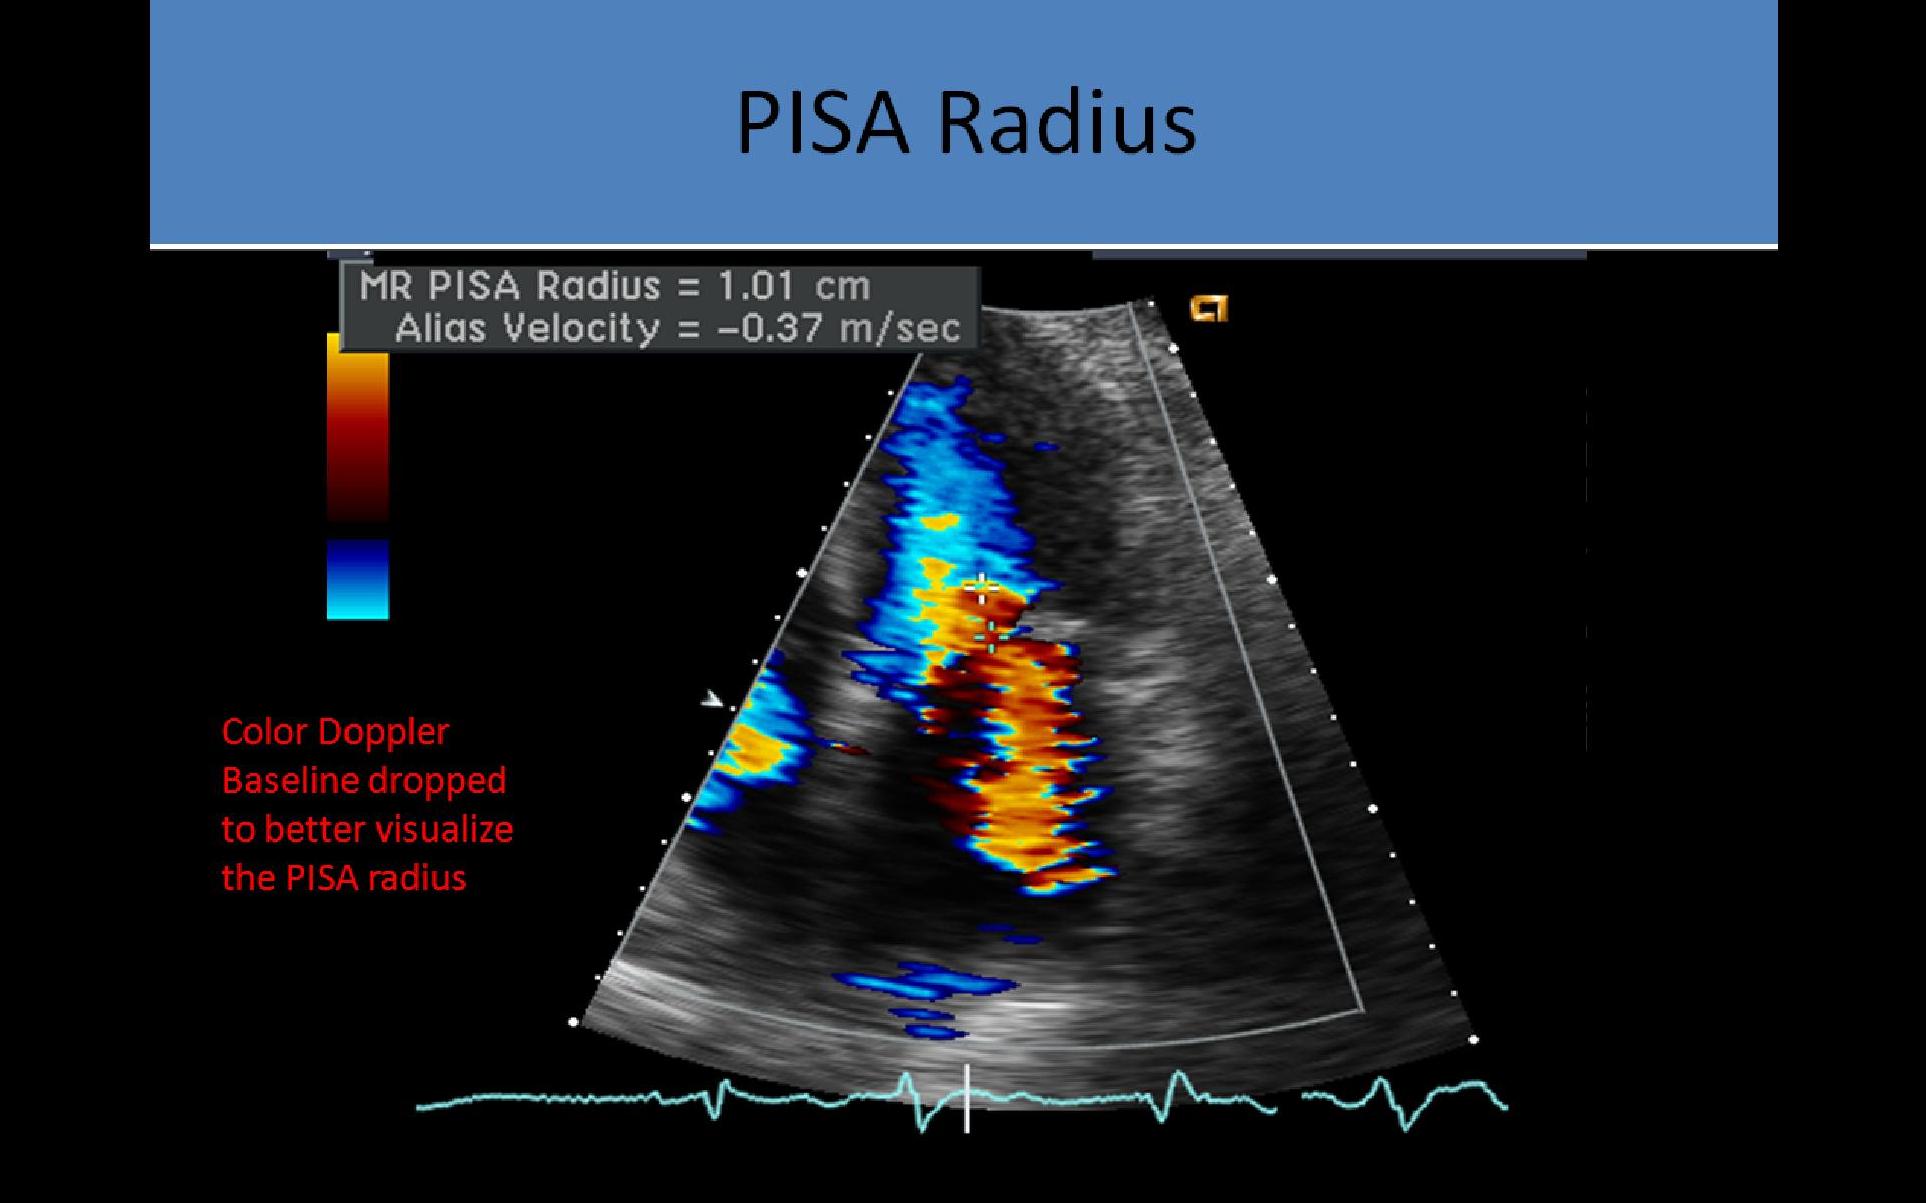 Adult Echocardiography Registry Review